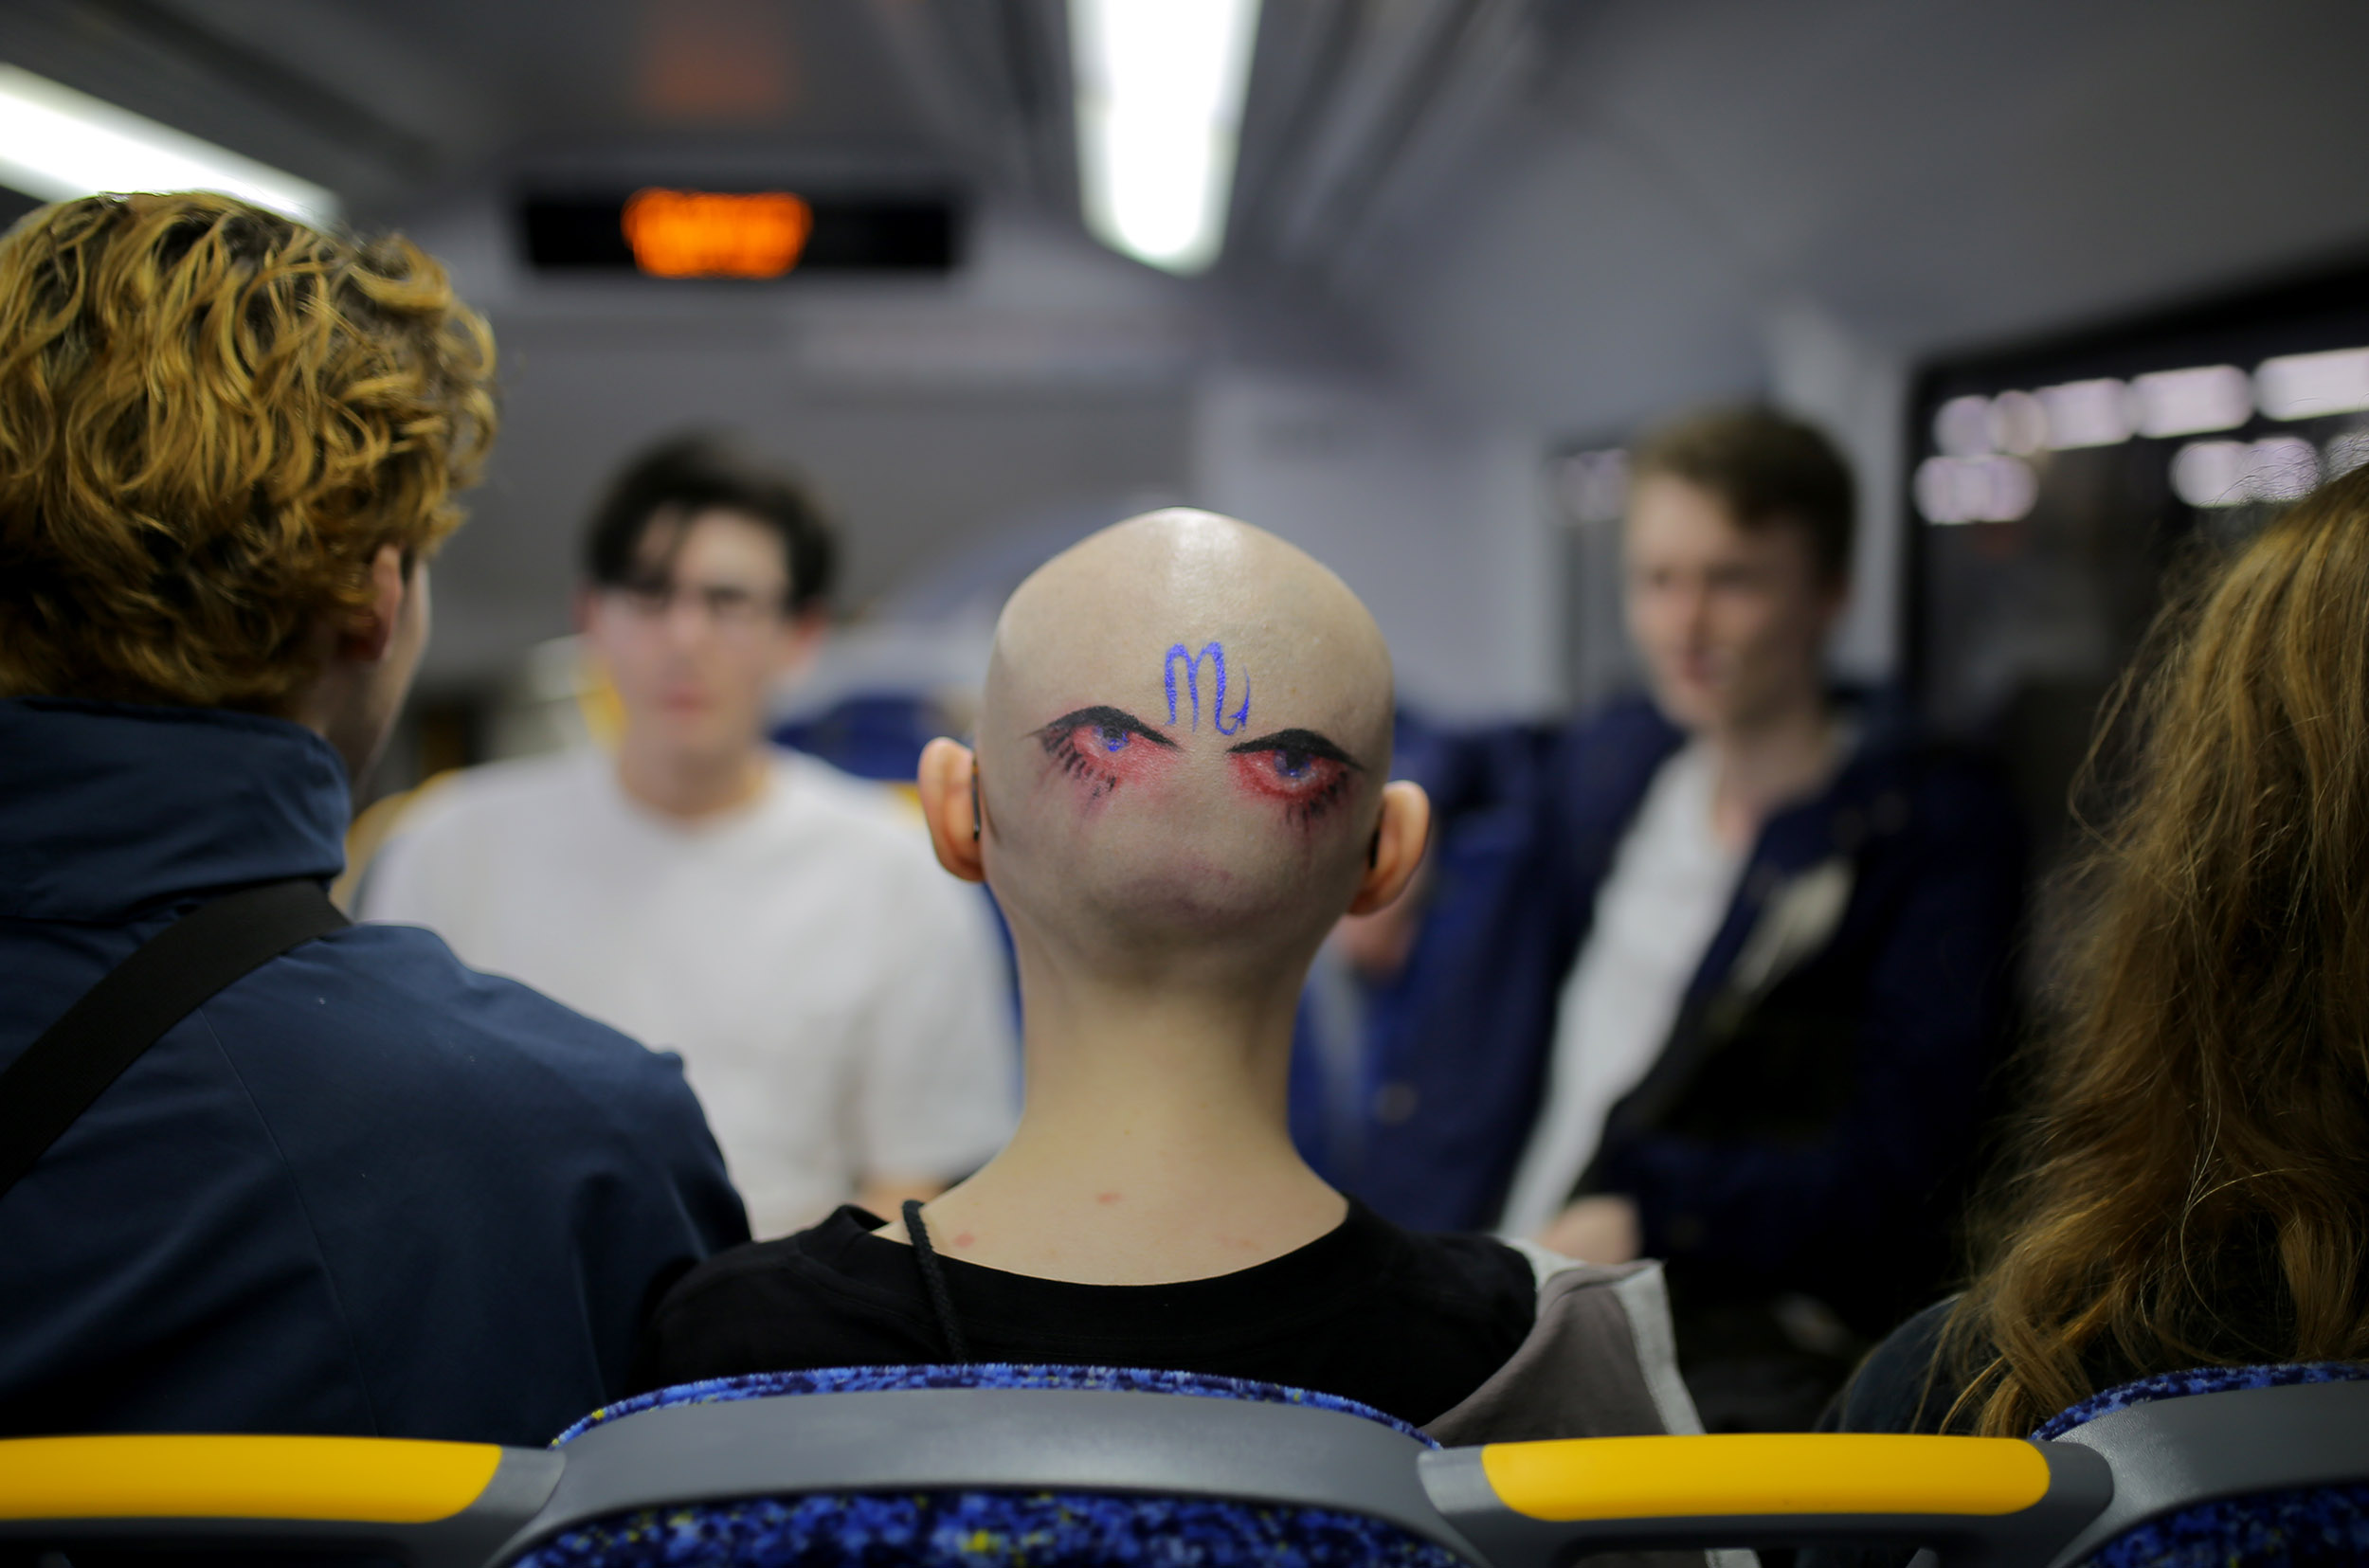  A girl with a pair of eyes and the Virgo zodiac symbol painted on the back of her head is seen on a train in North Sydney, Australia, March 20, 2017. 